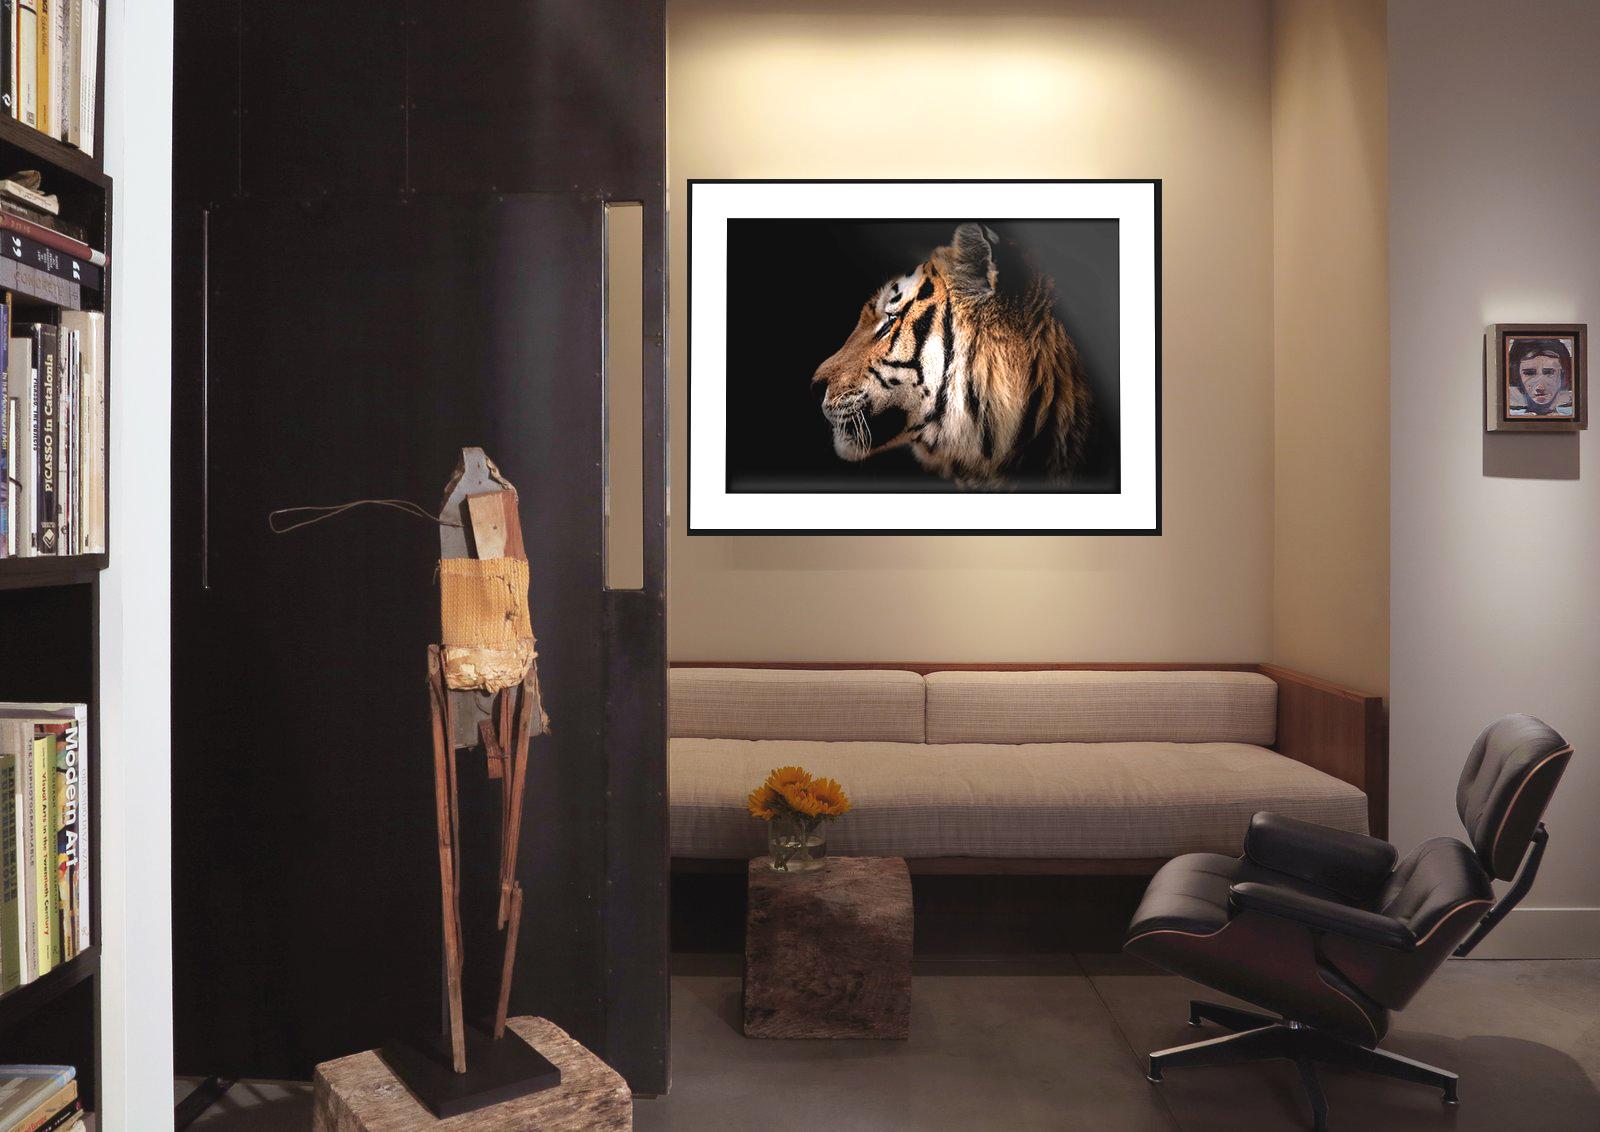 This is a contemporary photograph of a Tiger by Shane Russeck. 
60x40 edition of 10
Printed on archival paper using archival inks
Singed and numbered  

Shane Russeck is a modern day photographer, adventurer, and explorer. He first picked up a